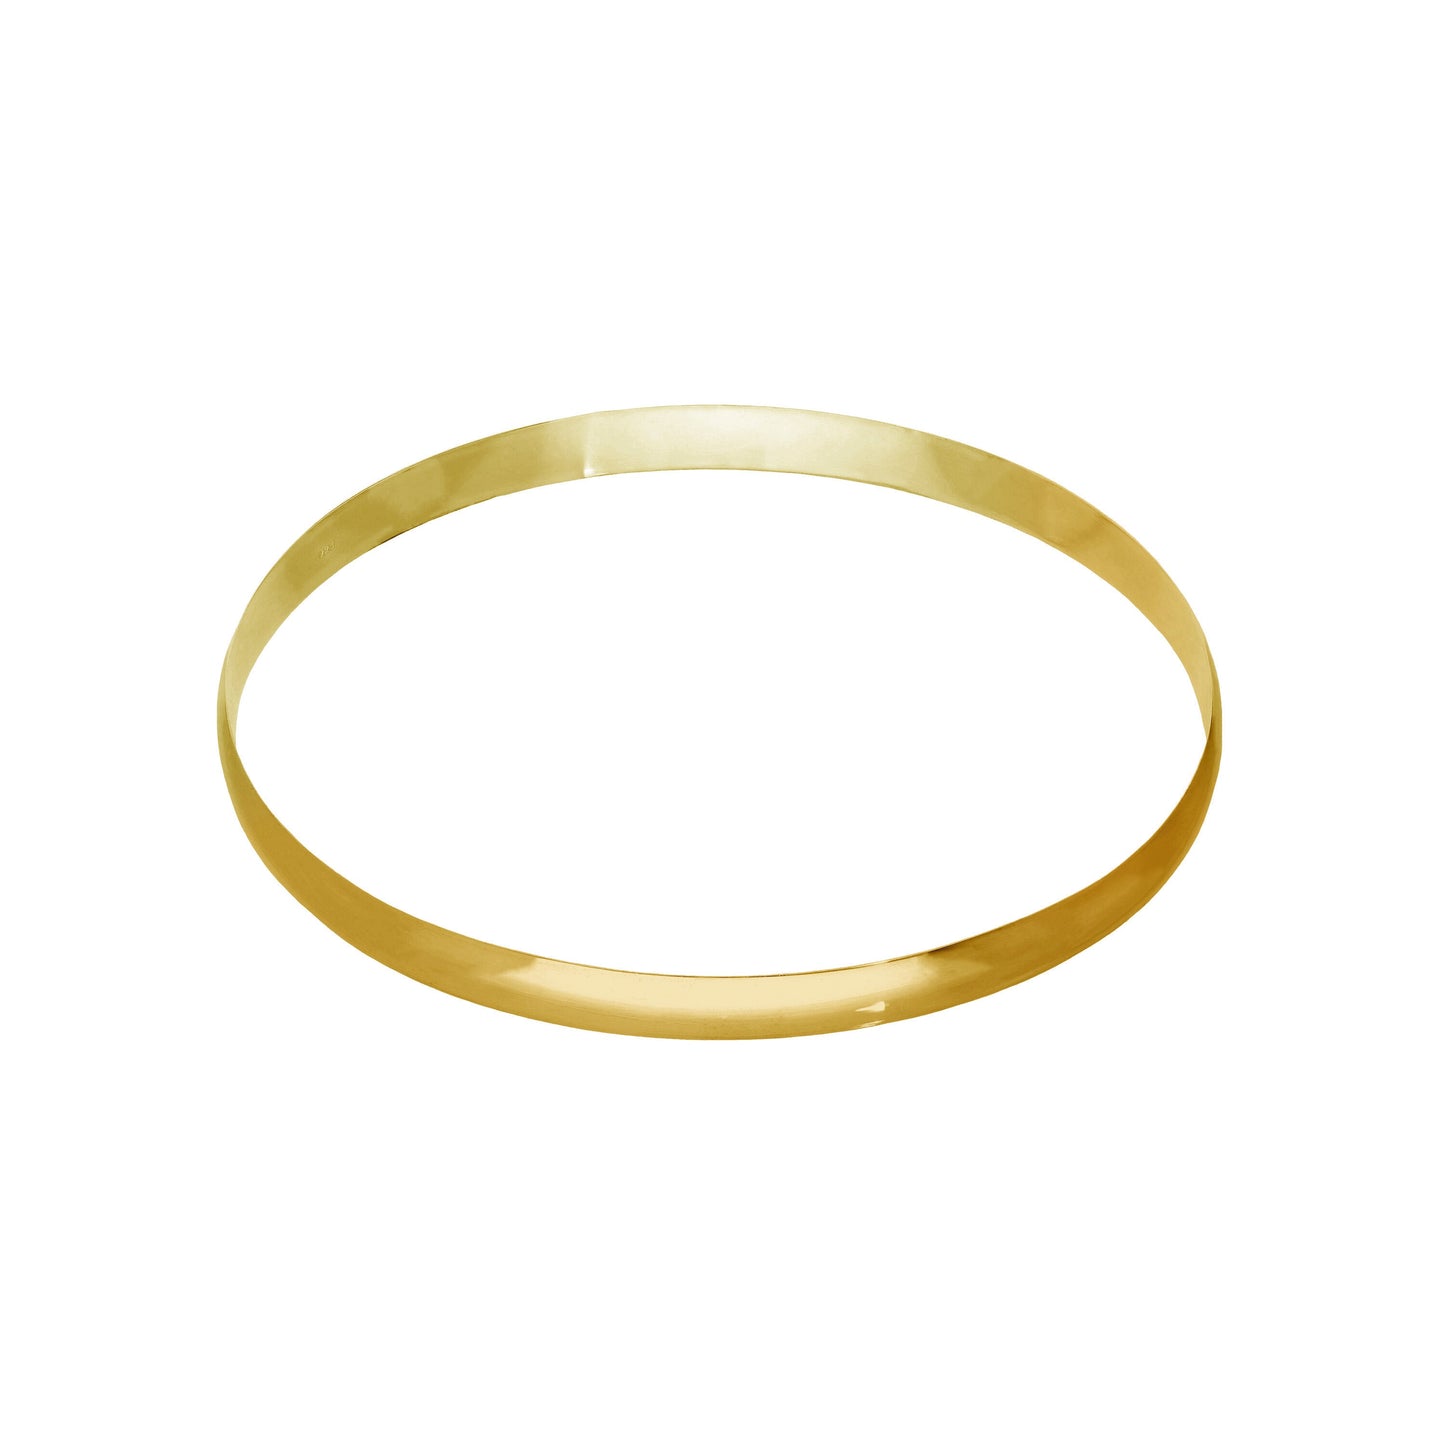 Gold Plated Sterling Silver Plain Round 65mm Bangle